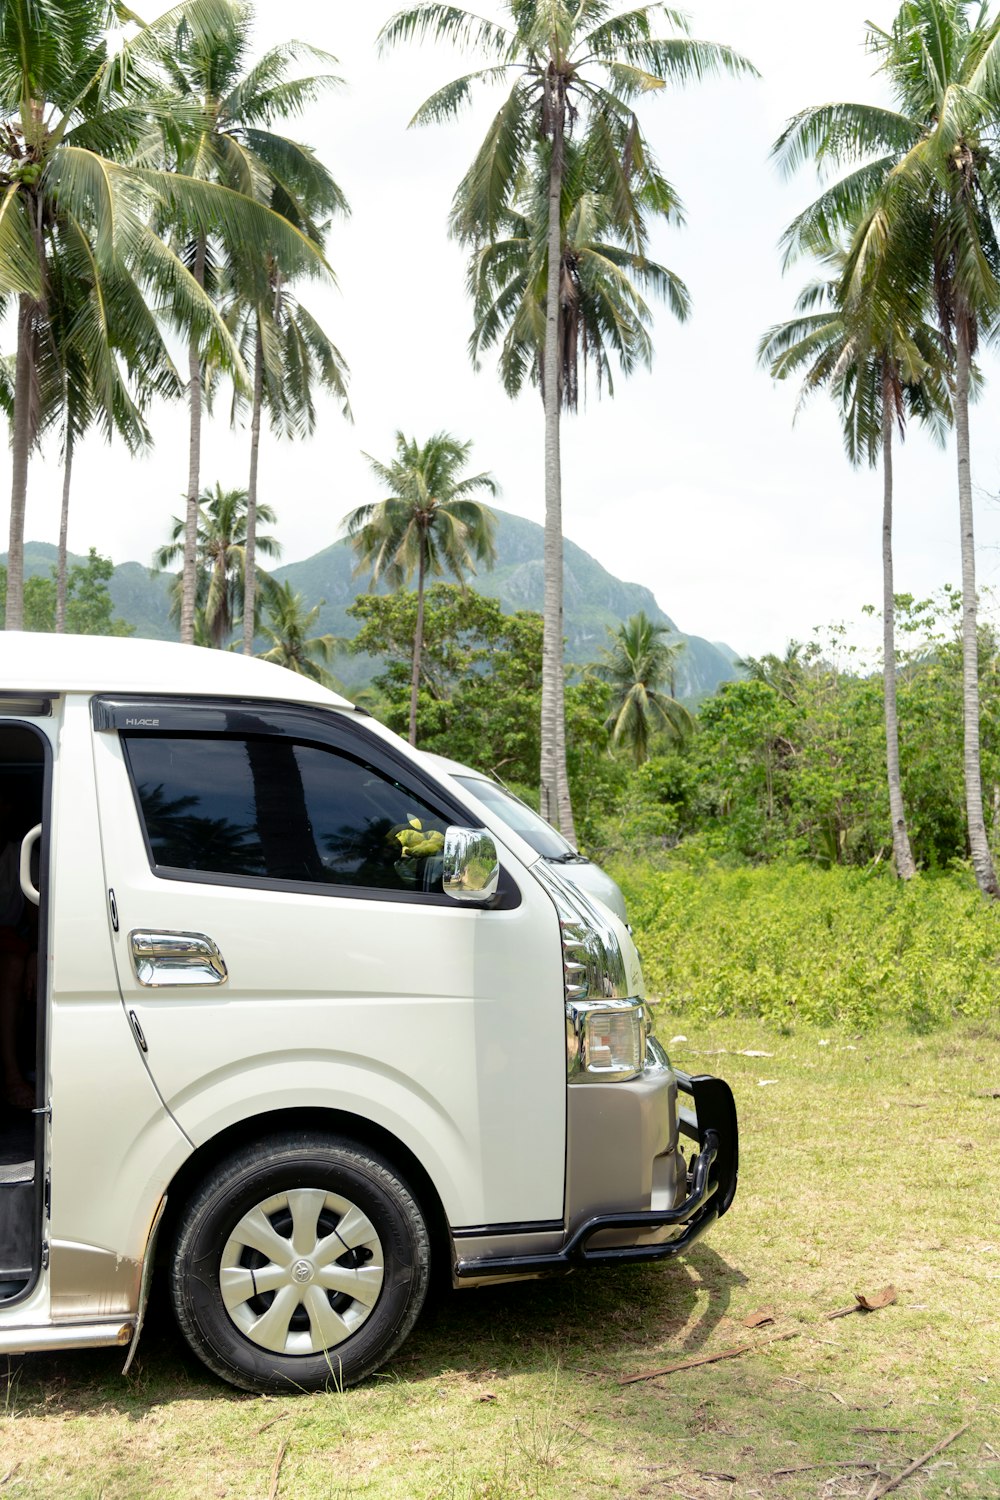 a small white van parked in front of palm trees